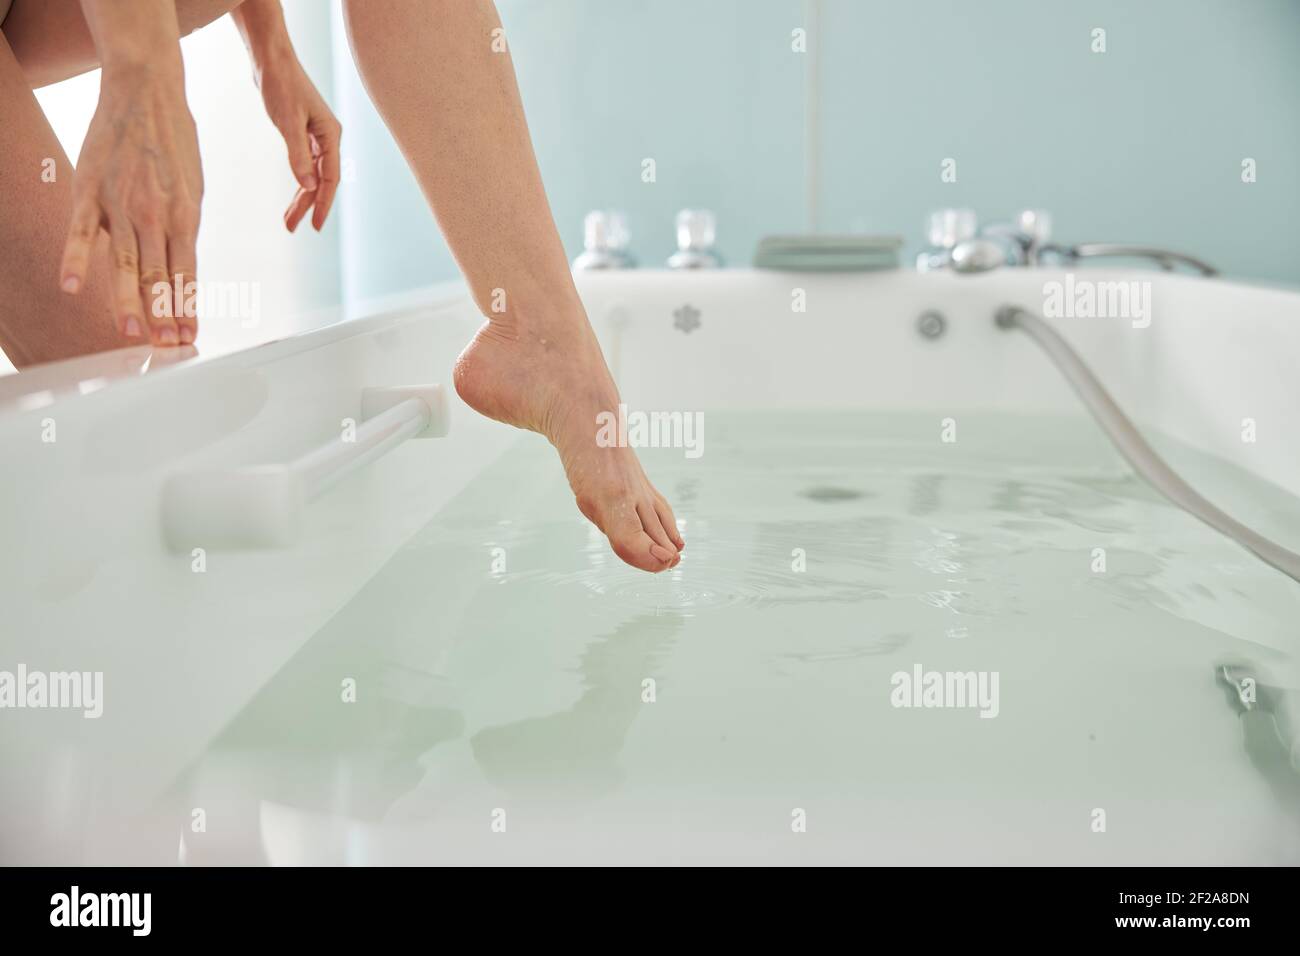 Person putting a leg in a spa bath with water Stock Photo - Alamy